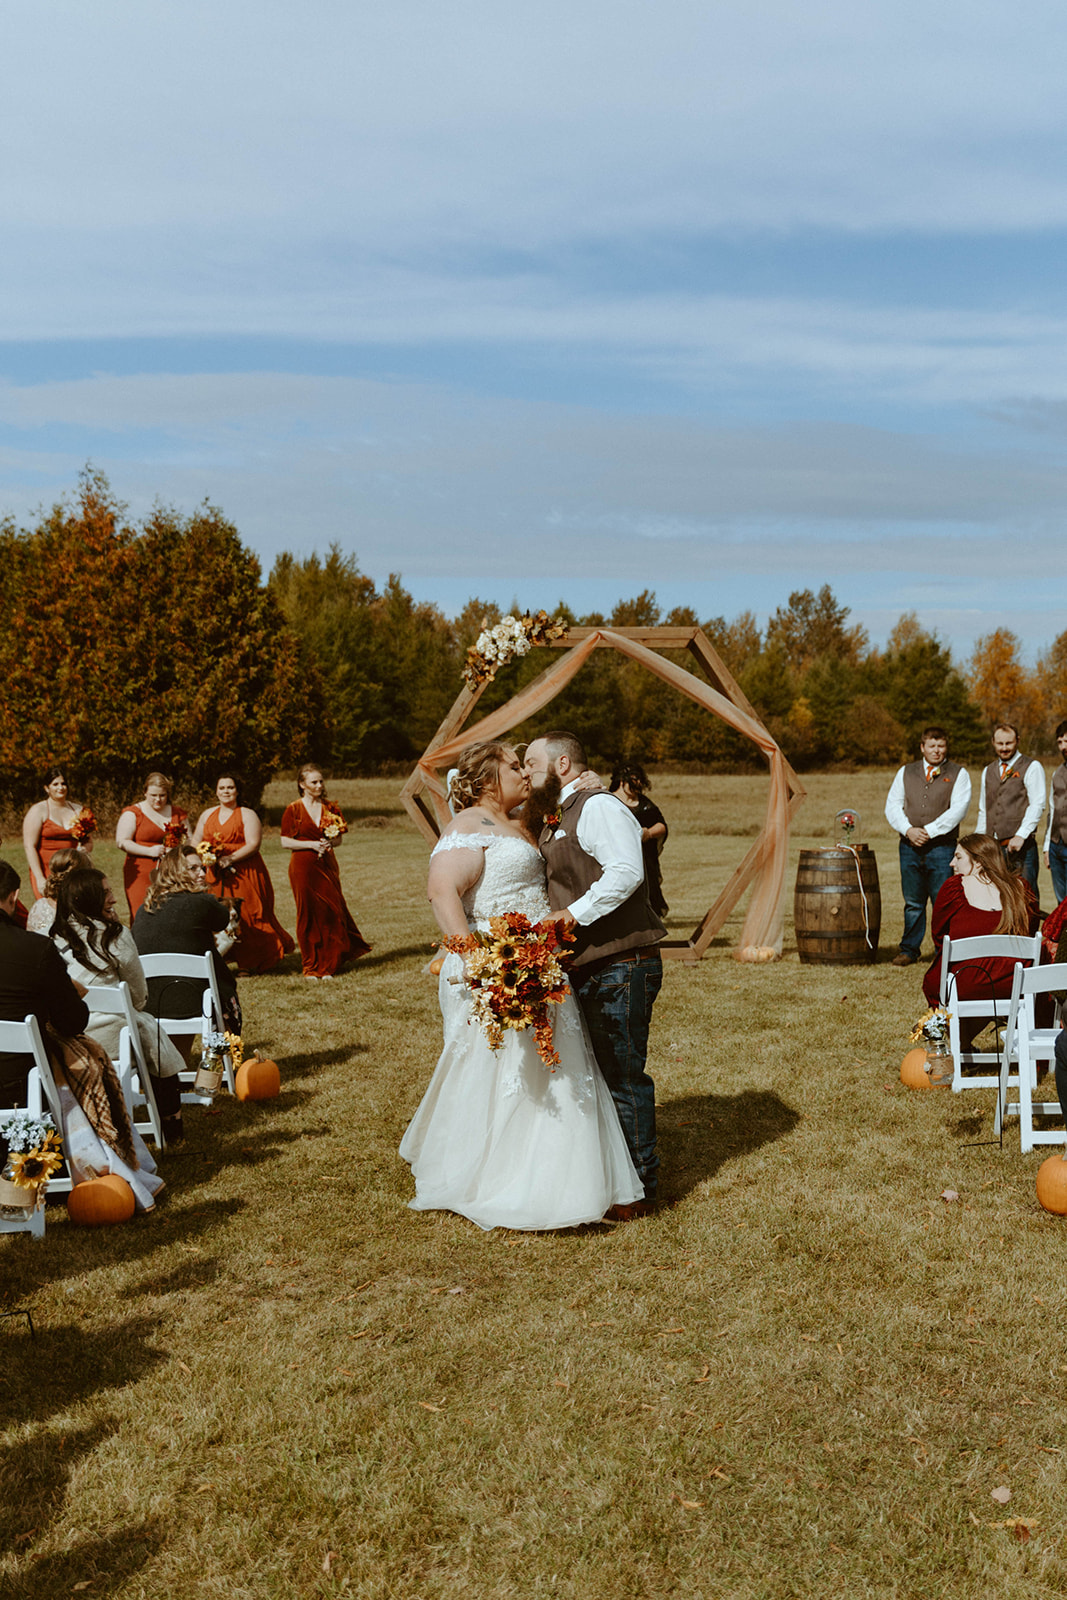 First kiss as husband and wife during fall wedding in Escanaba.